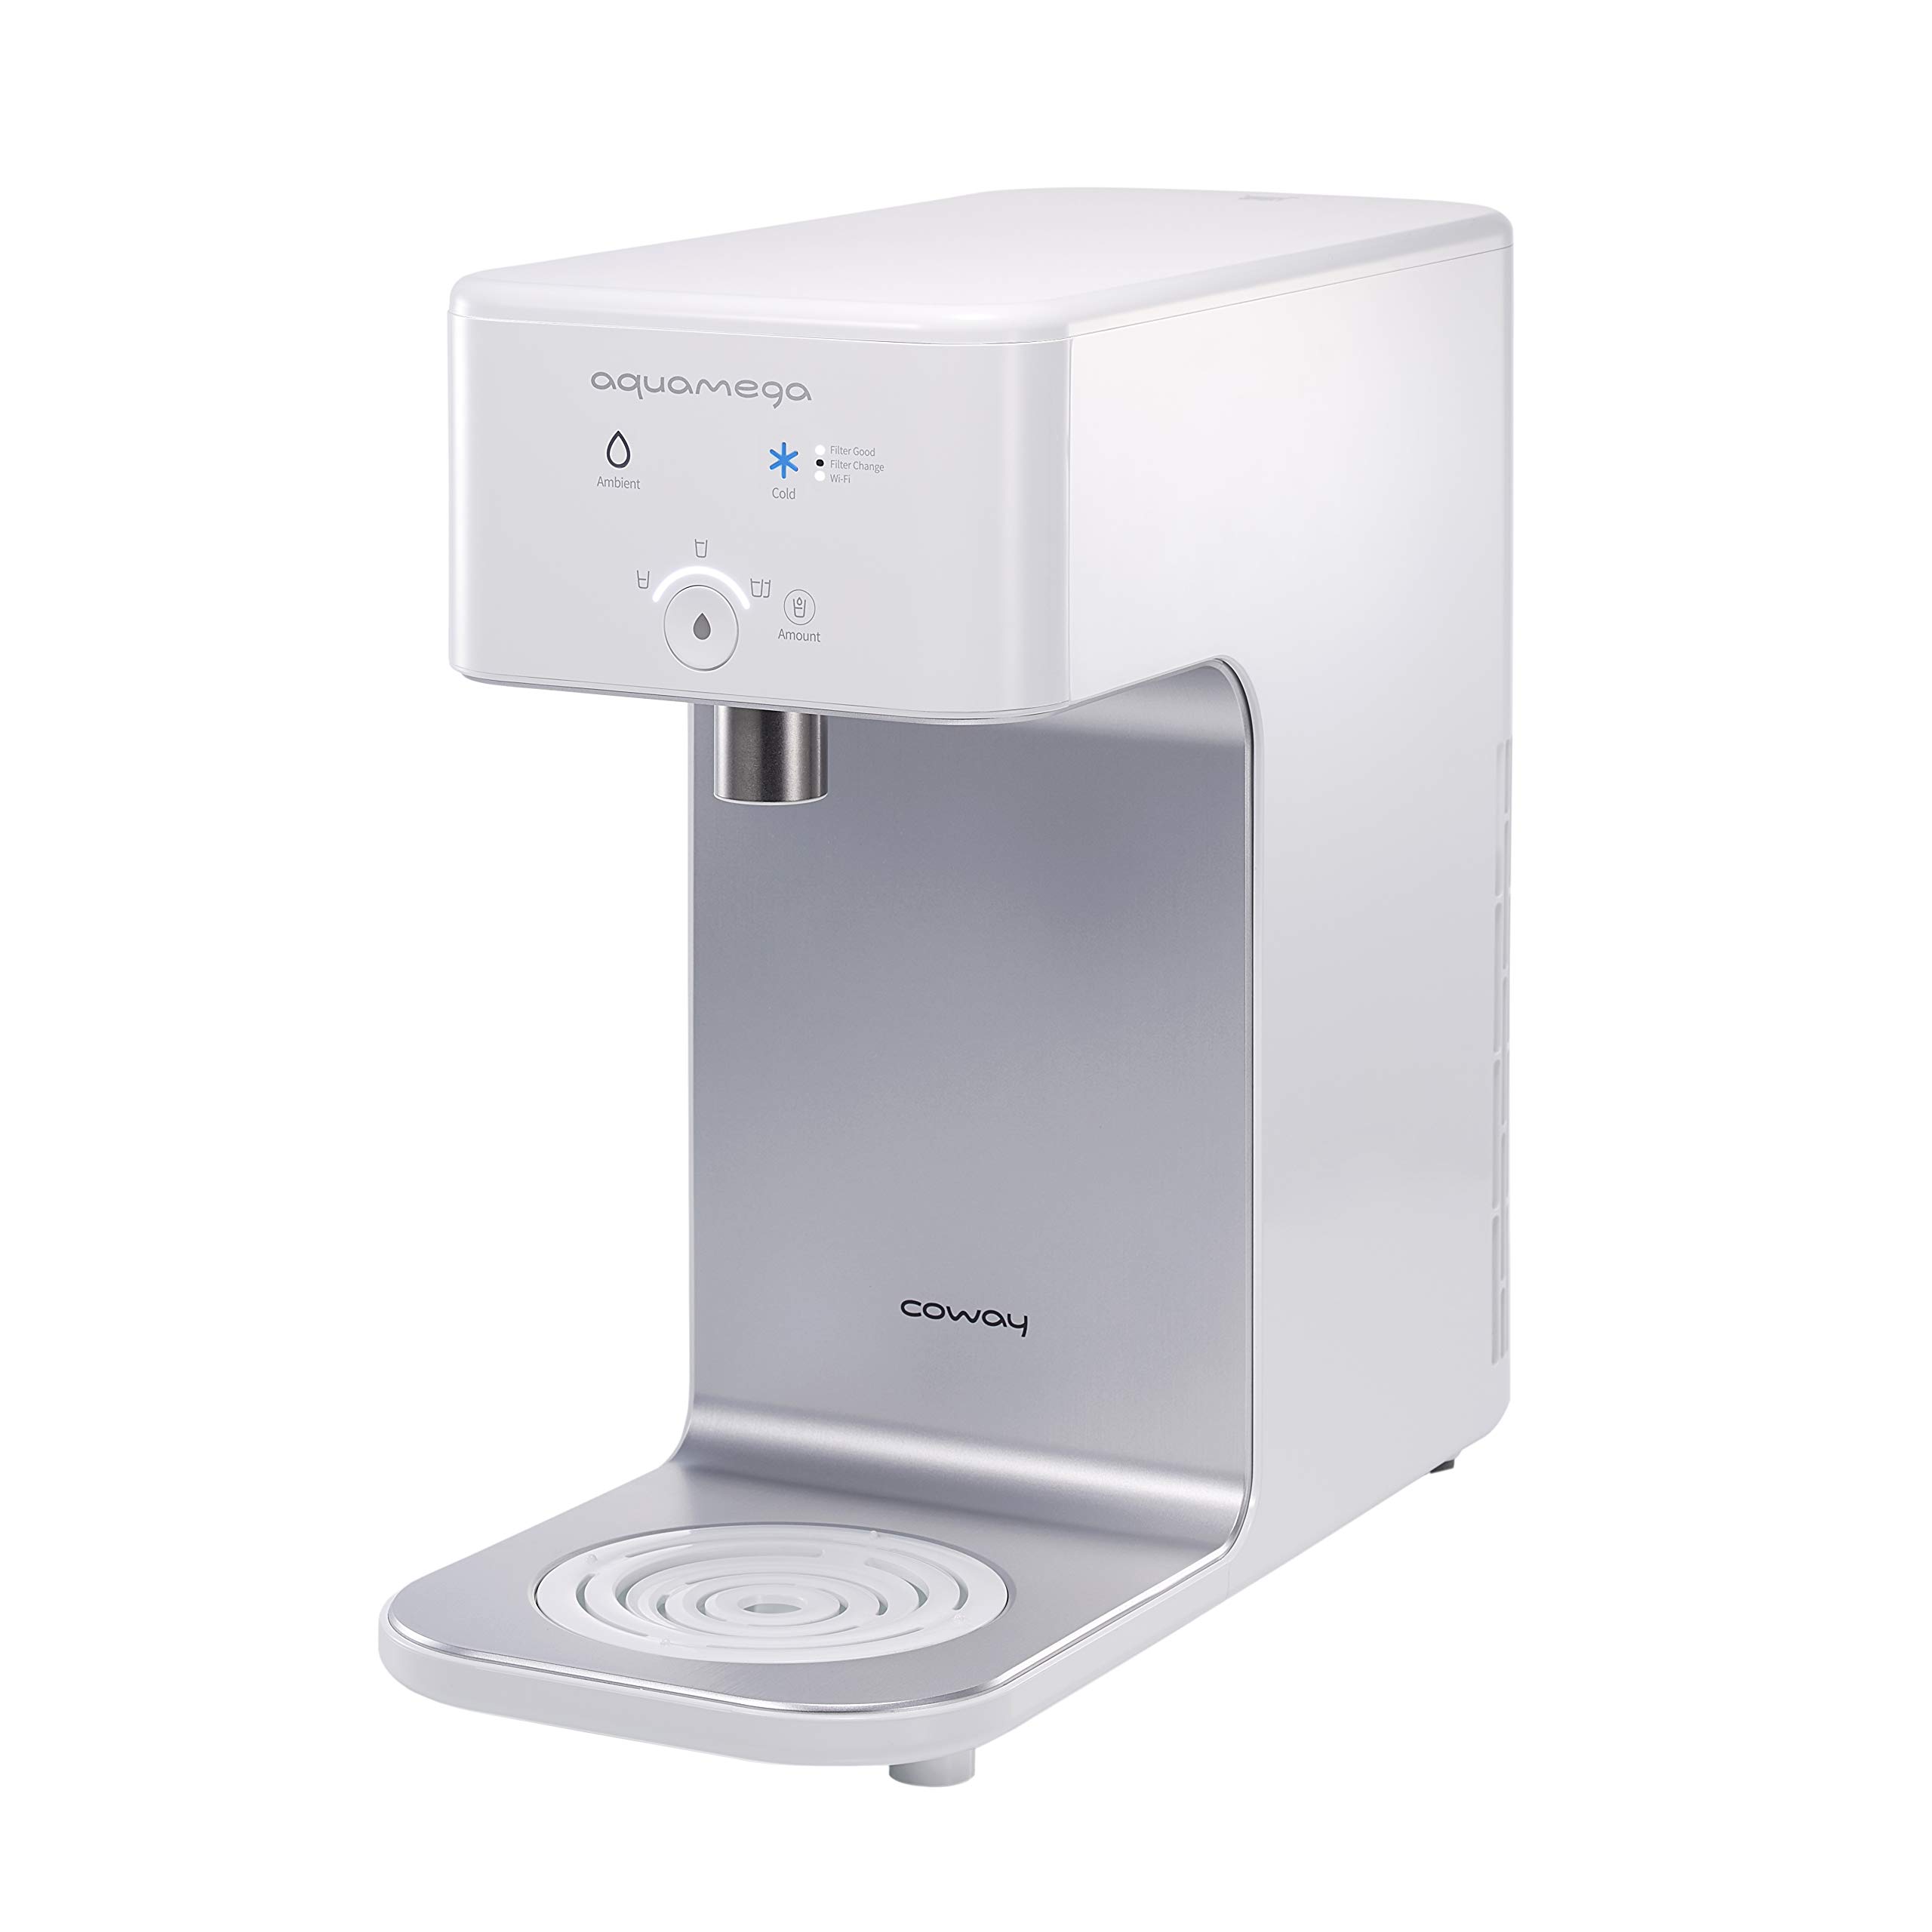 Coway Aquamega 200C Countertop Water Purifier with a cold-water setting, a new advanced filter, and Coway Io-Care app connectivity,White,16.5 x 7.1 x 14.7